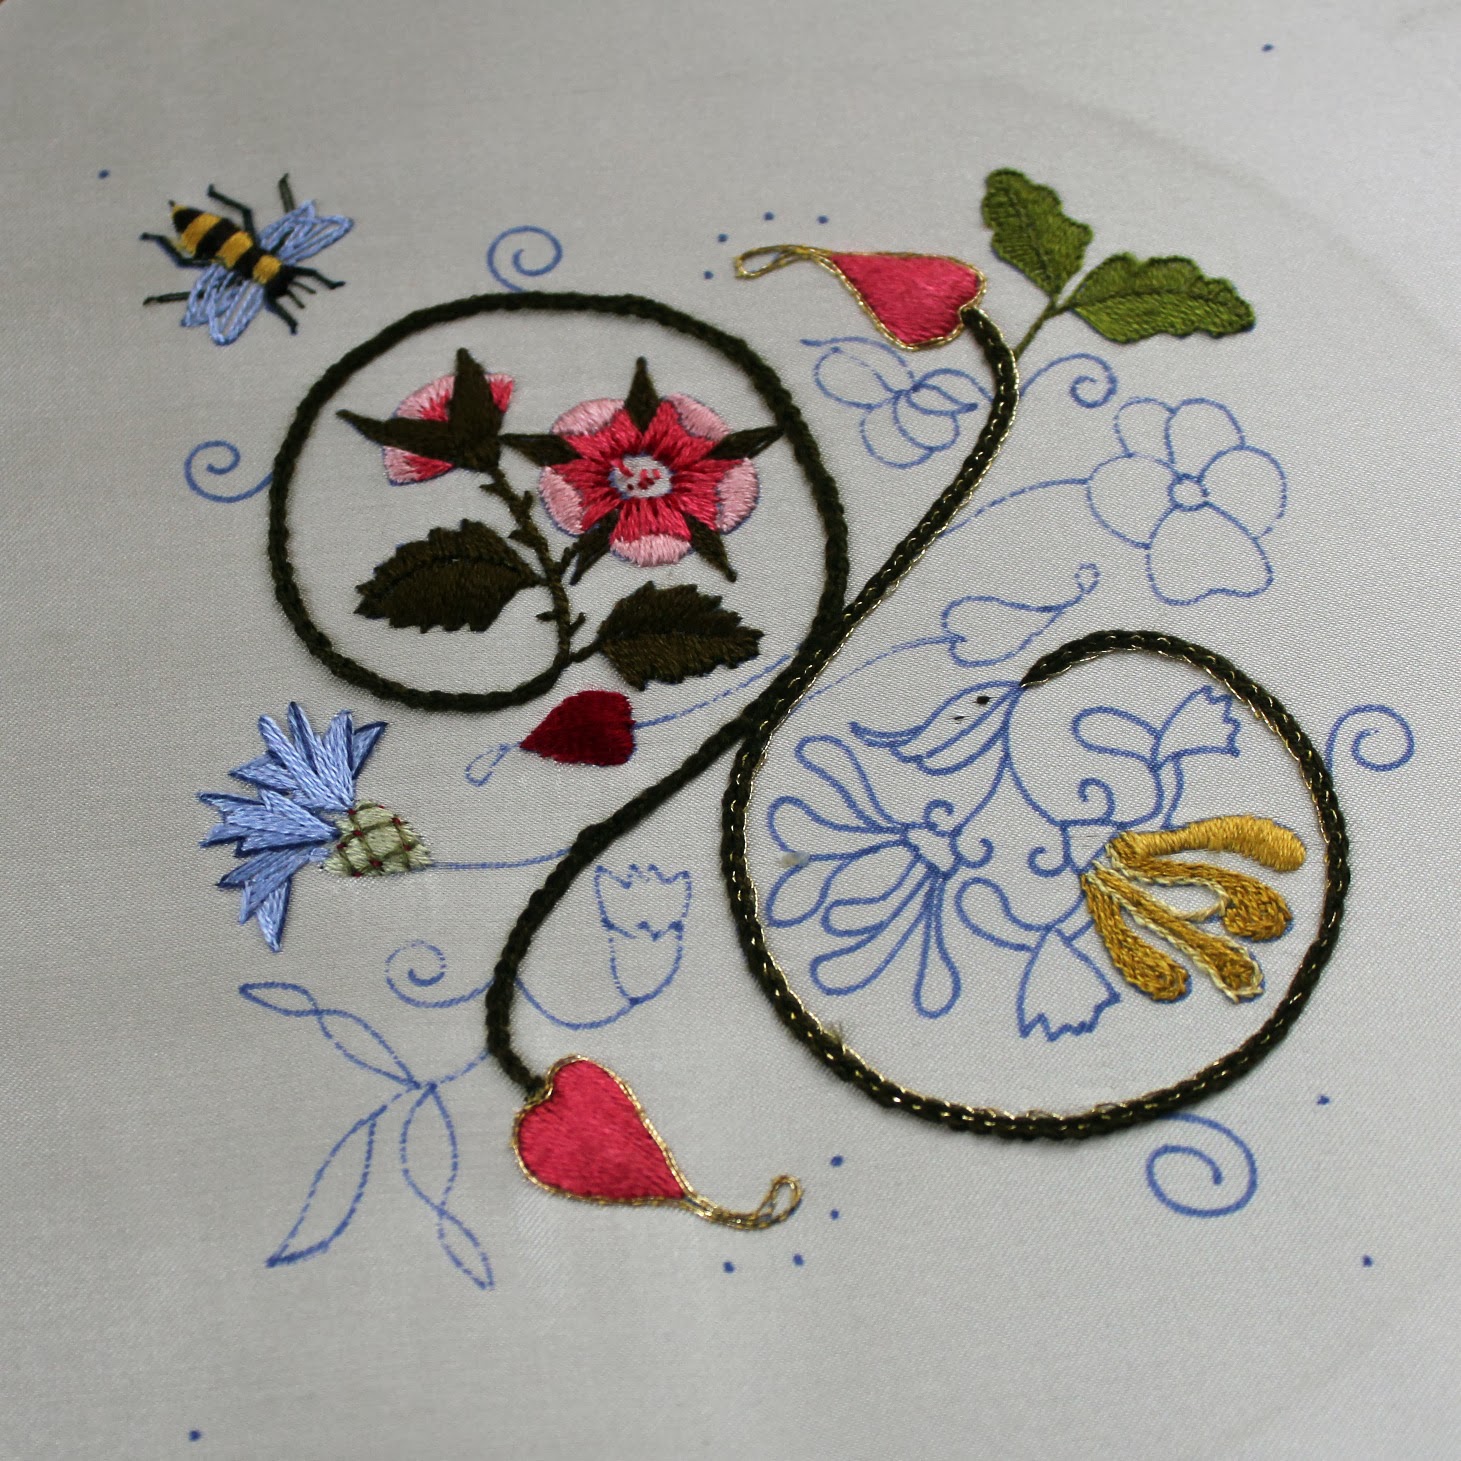 Bea's Stitcheries: Surface Embroidery